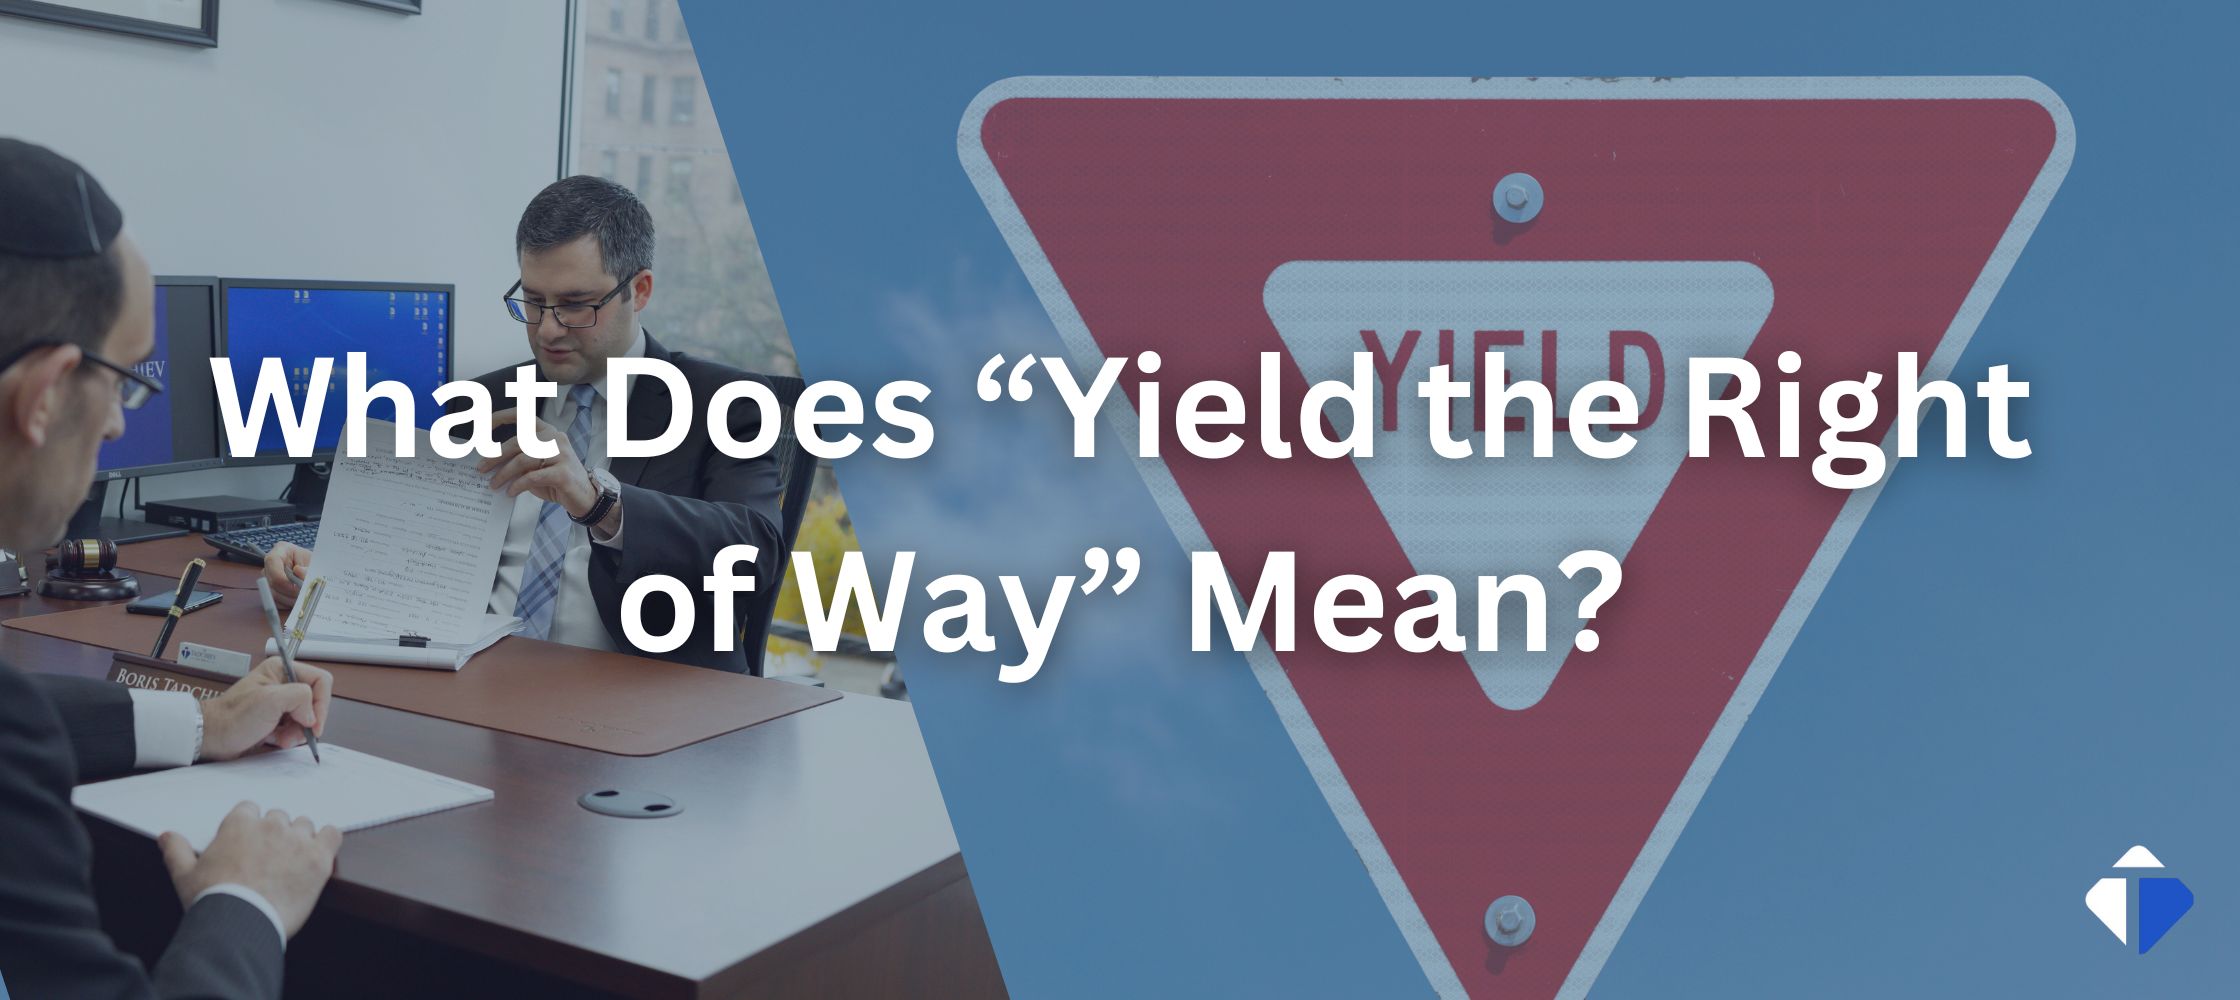 What Does “Yield the Right of Way” Mean?